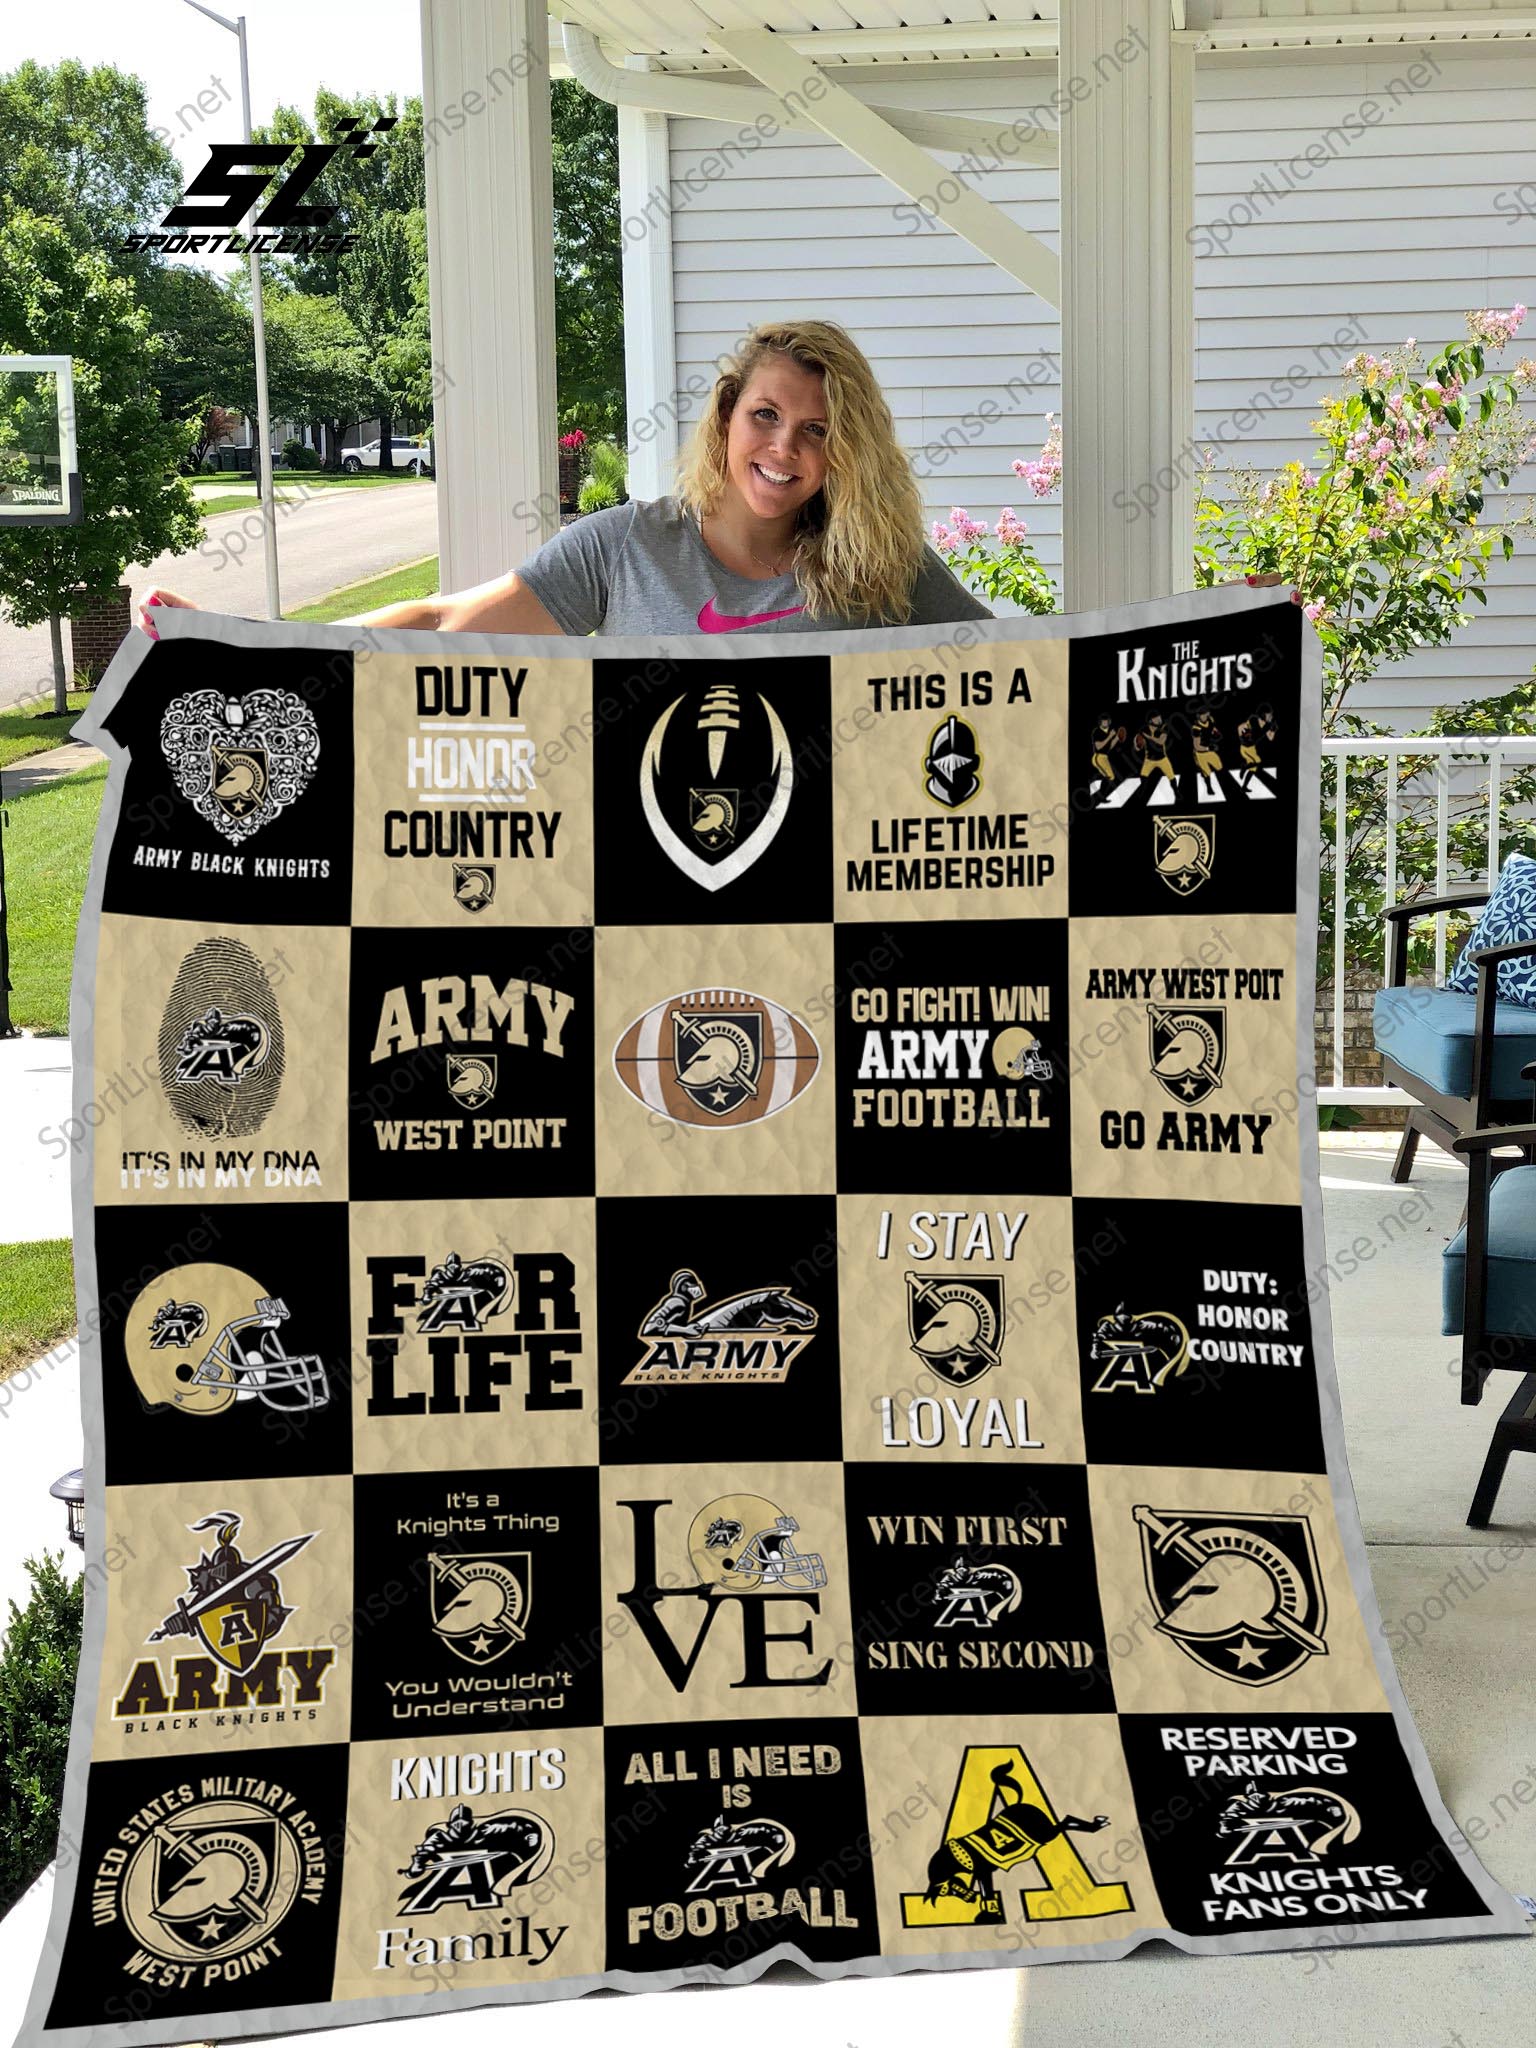 Army west point black knights quilt 2